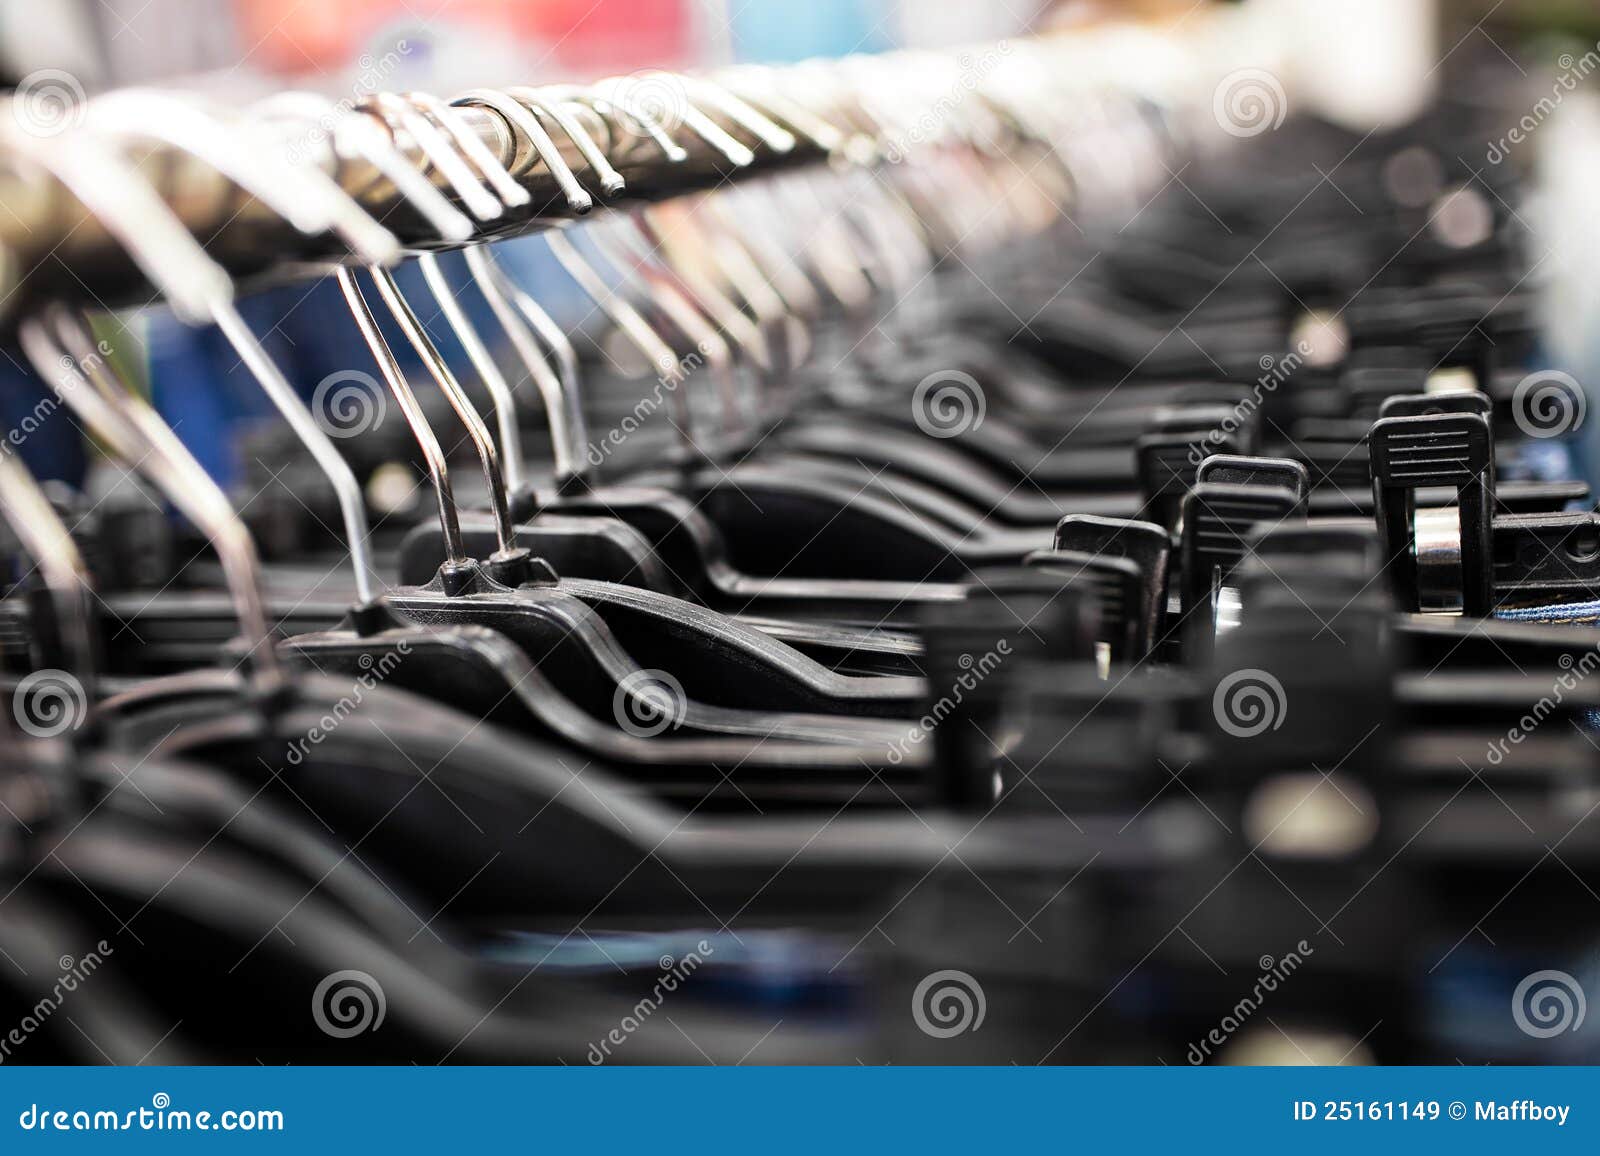 Clothes hanger stock image. Image of hanging, group, textile - 25161149